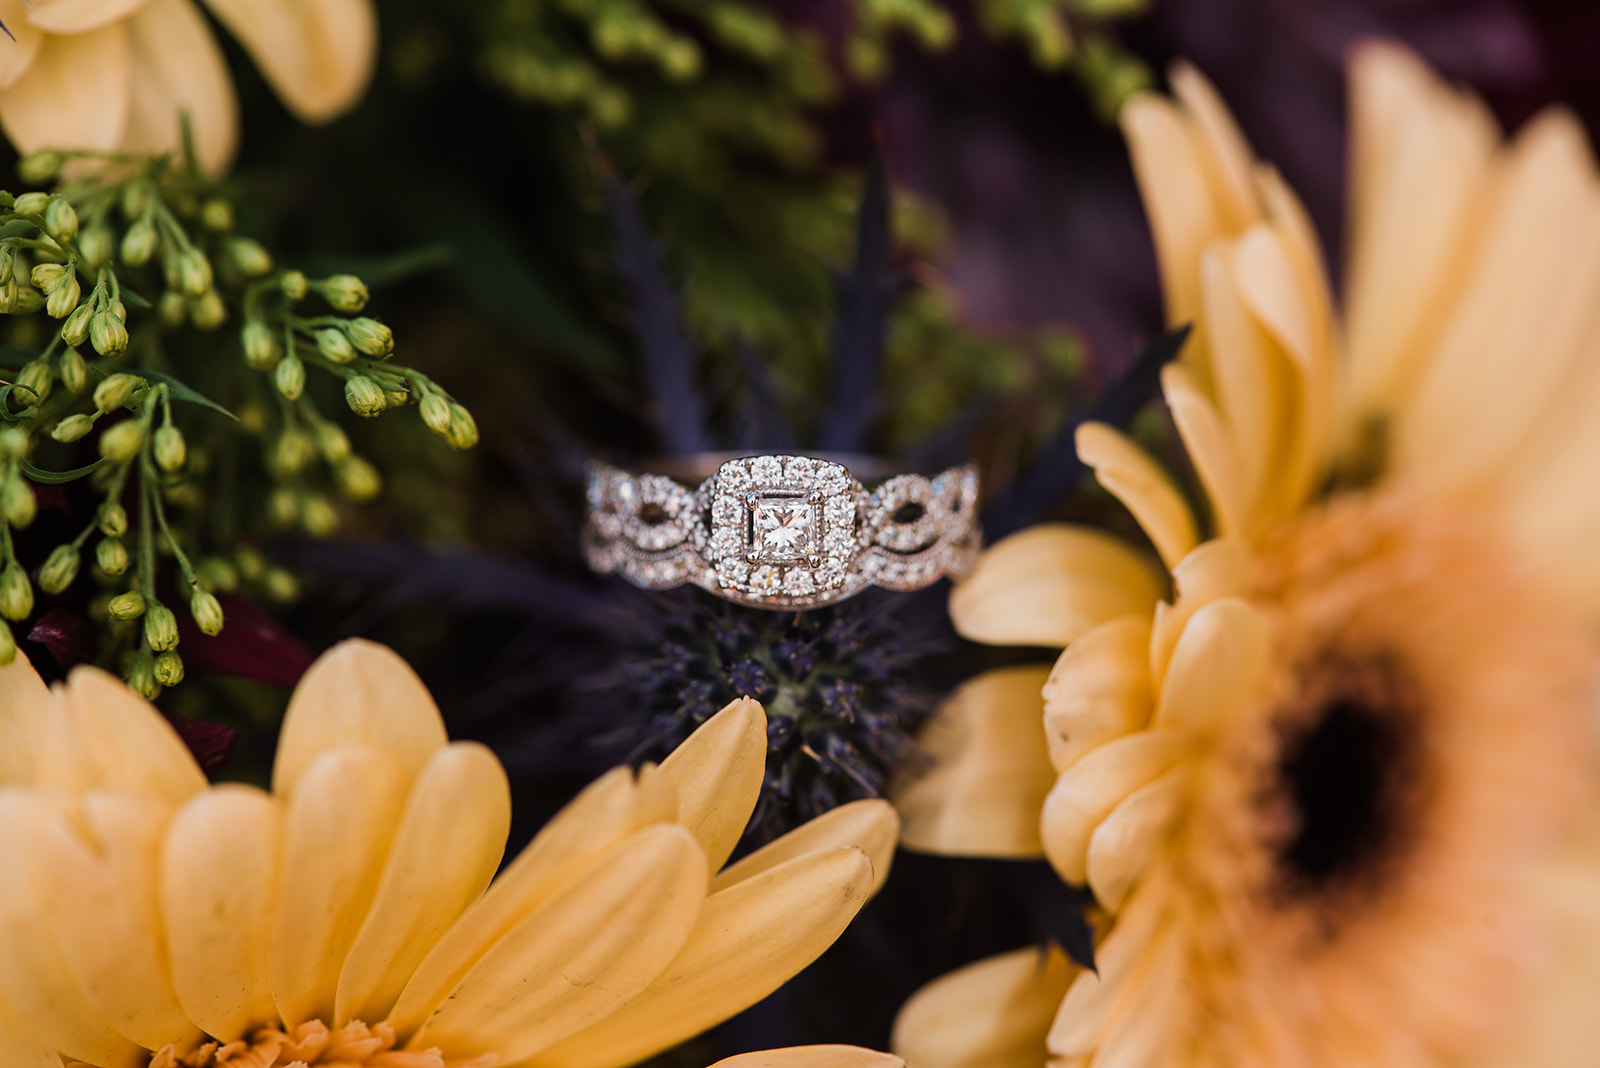 A wedding ring sits on a purple flower amongst tan daisies